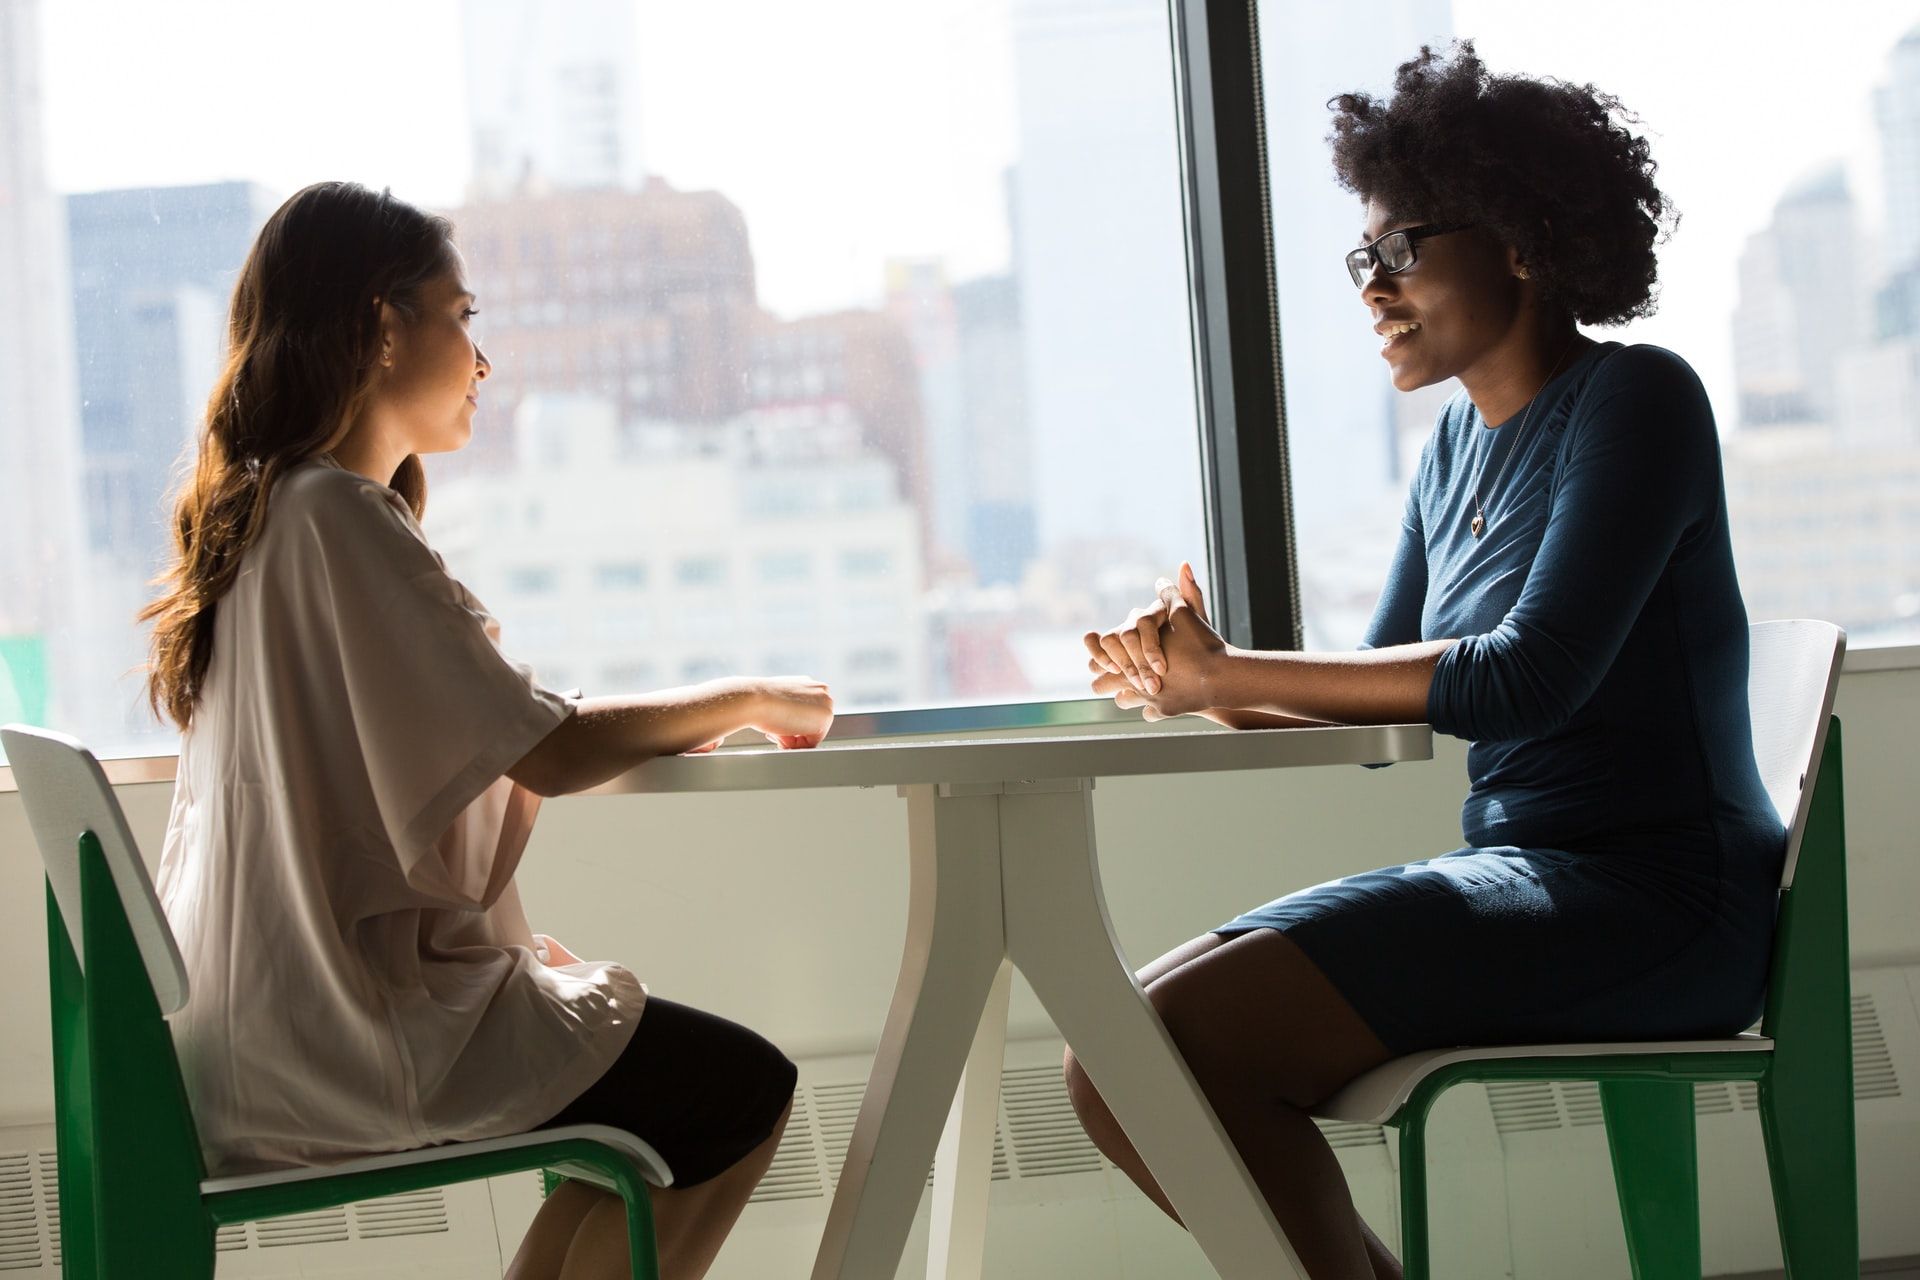 Two women in an interview, good employee traits